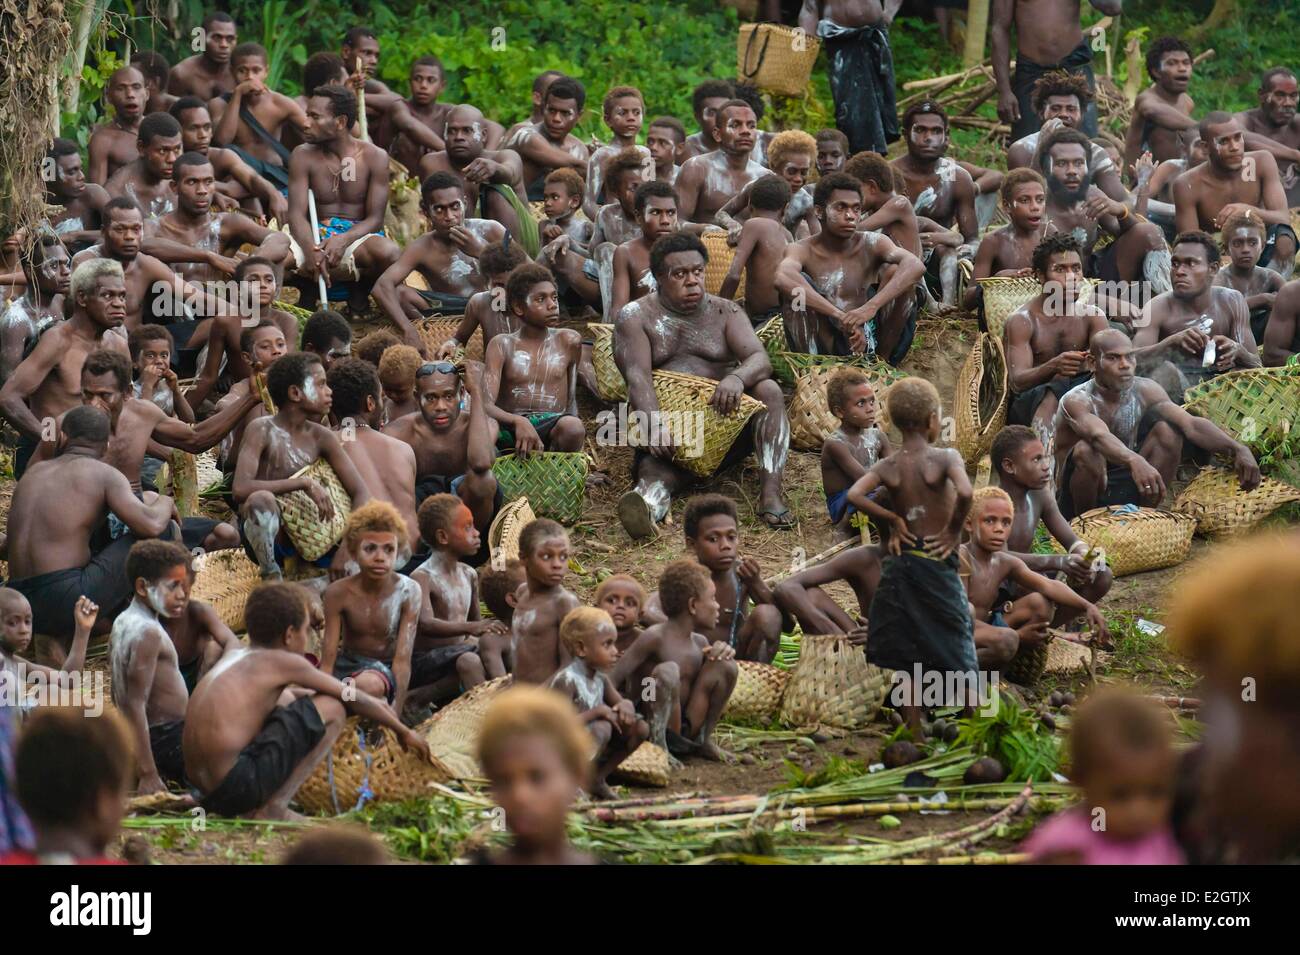 Papua New Guinea Bismarck Archipelago Gazelle peninsula New Britain island East New Britain province Rabaul Tavana village Tolai ceremony consolidation of village for arrival of spirits embodied by an initiate covered leafy called Duk Duk Stock Photo